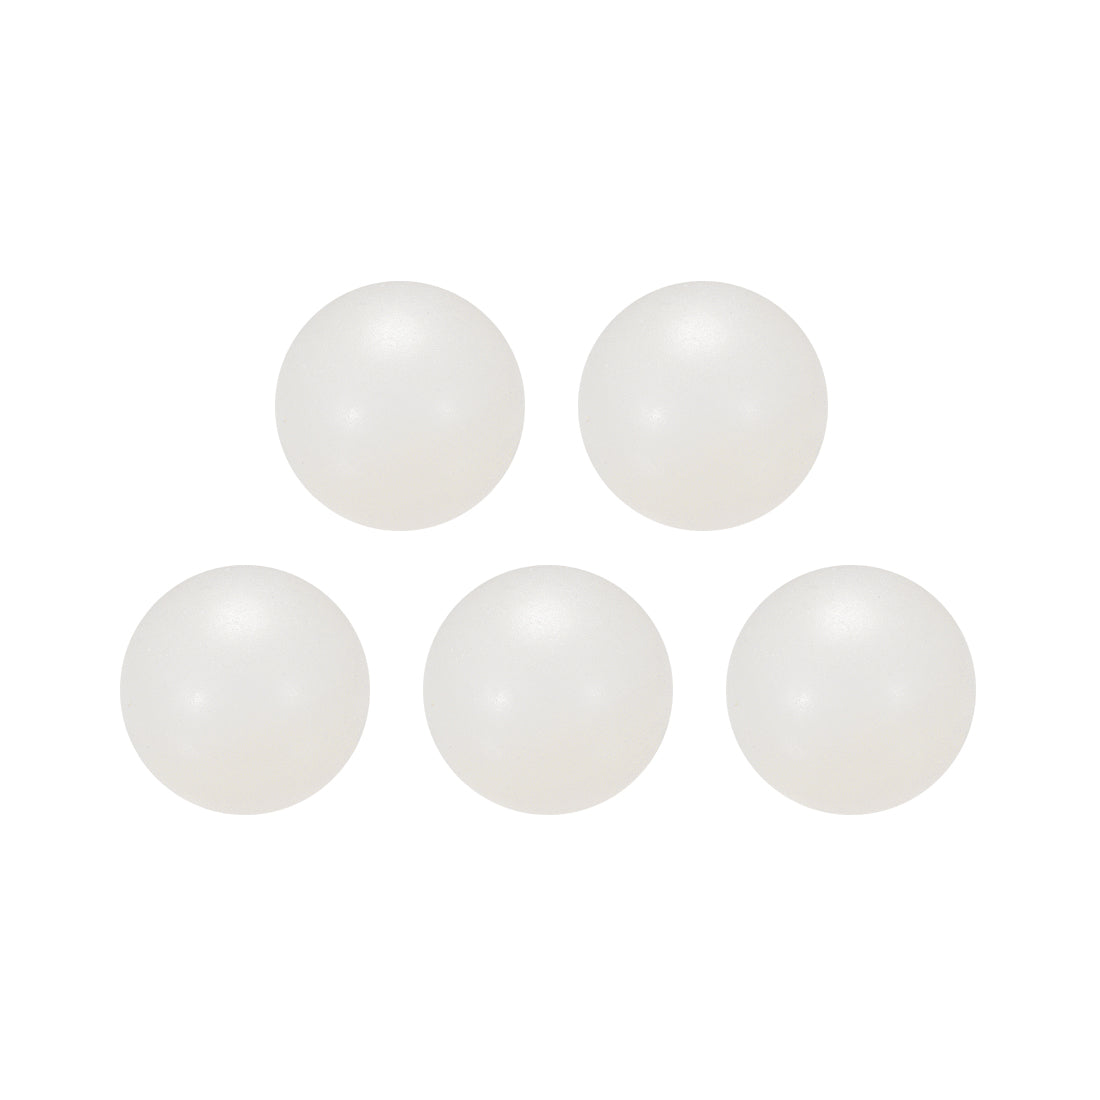 Uxcell Uxcell 18mm PP Solid Plastic Balls, Precision Bearing Ball 5pcs